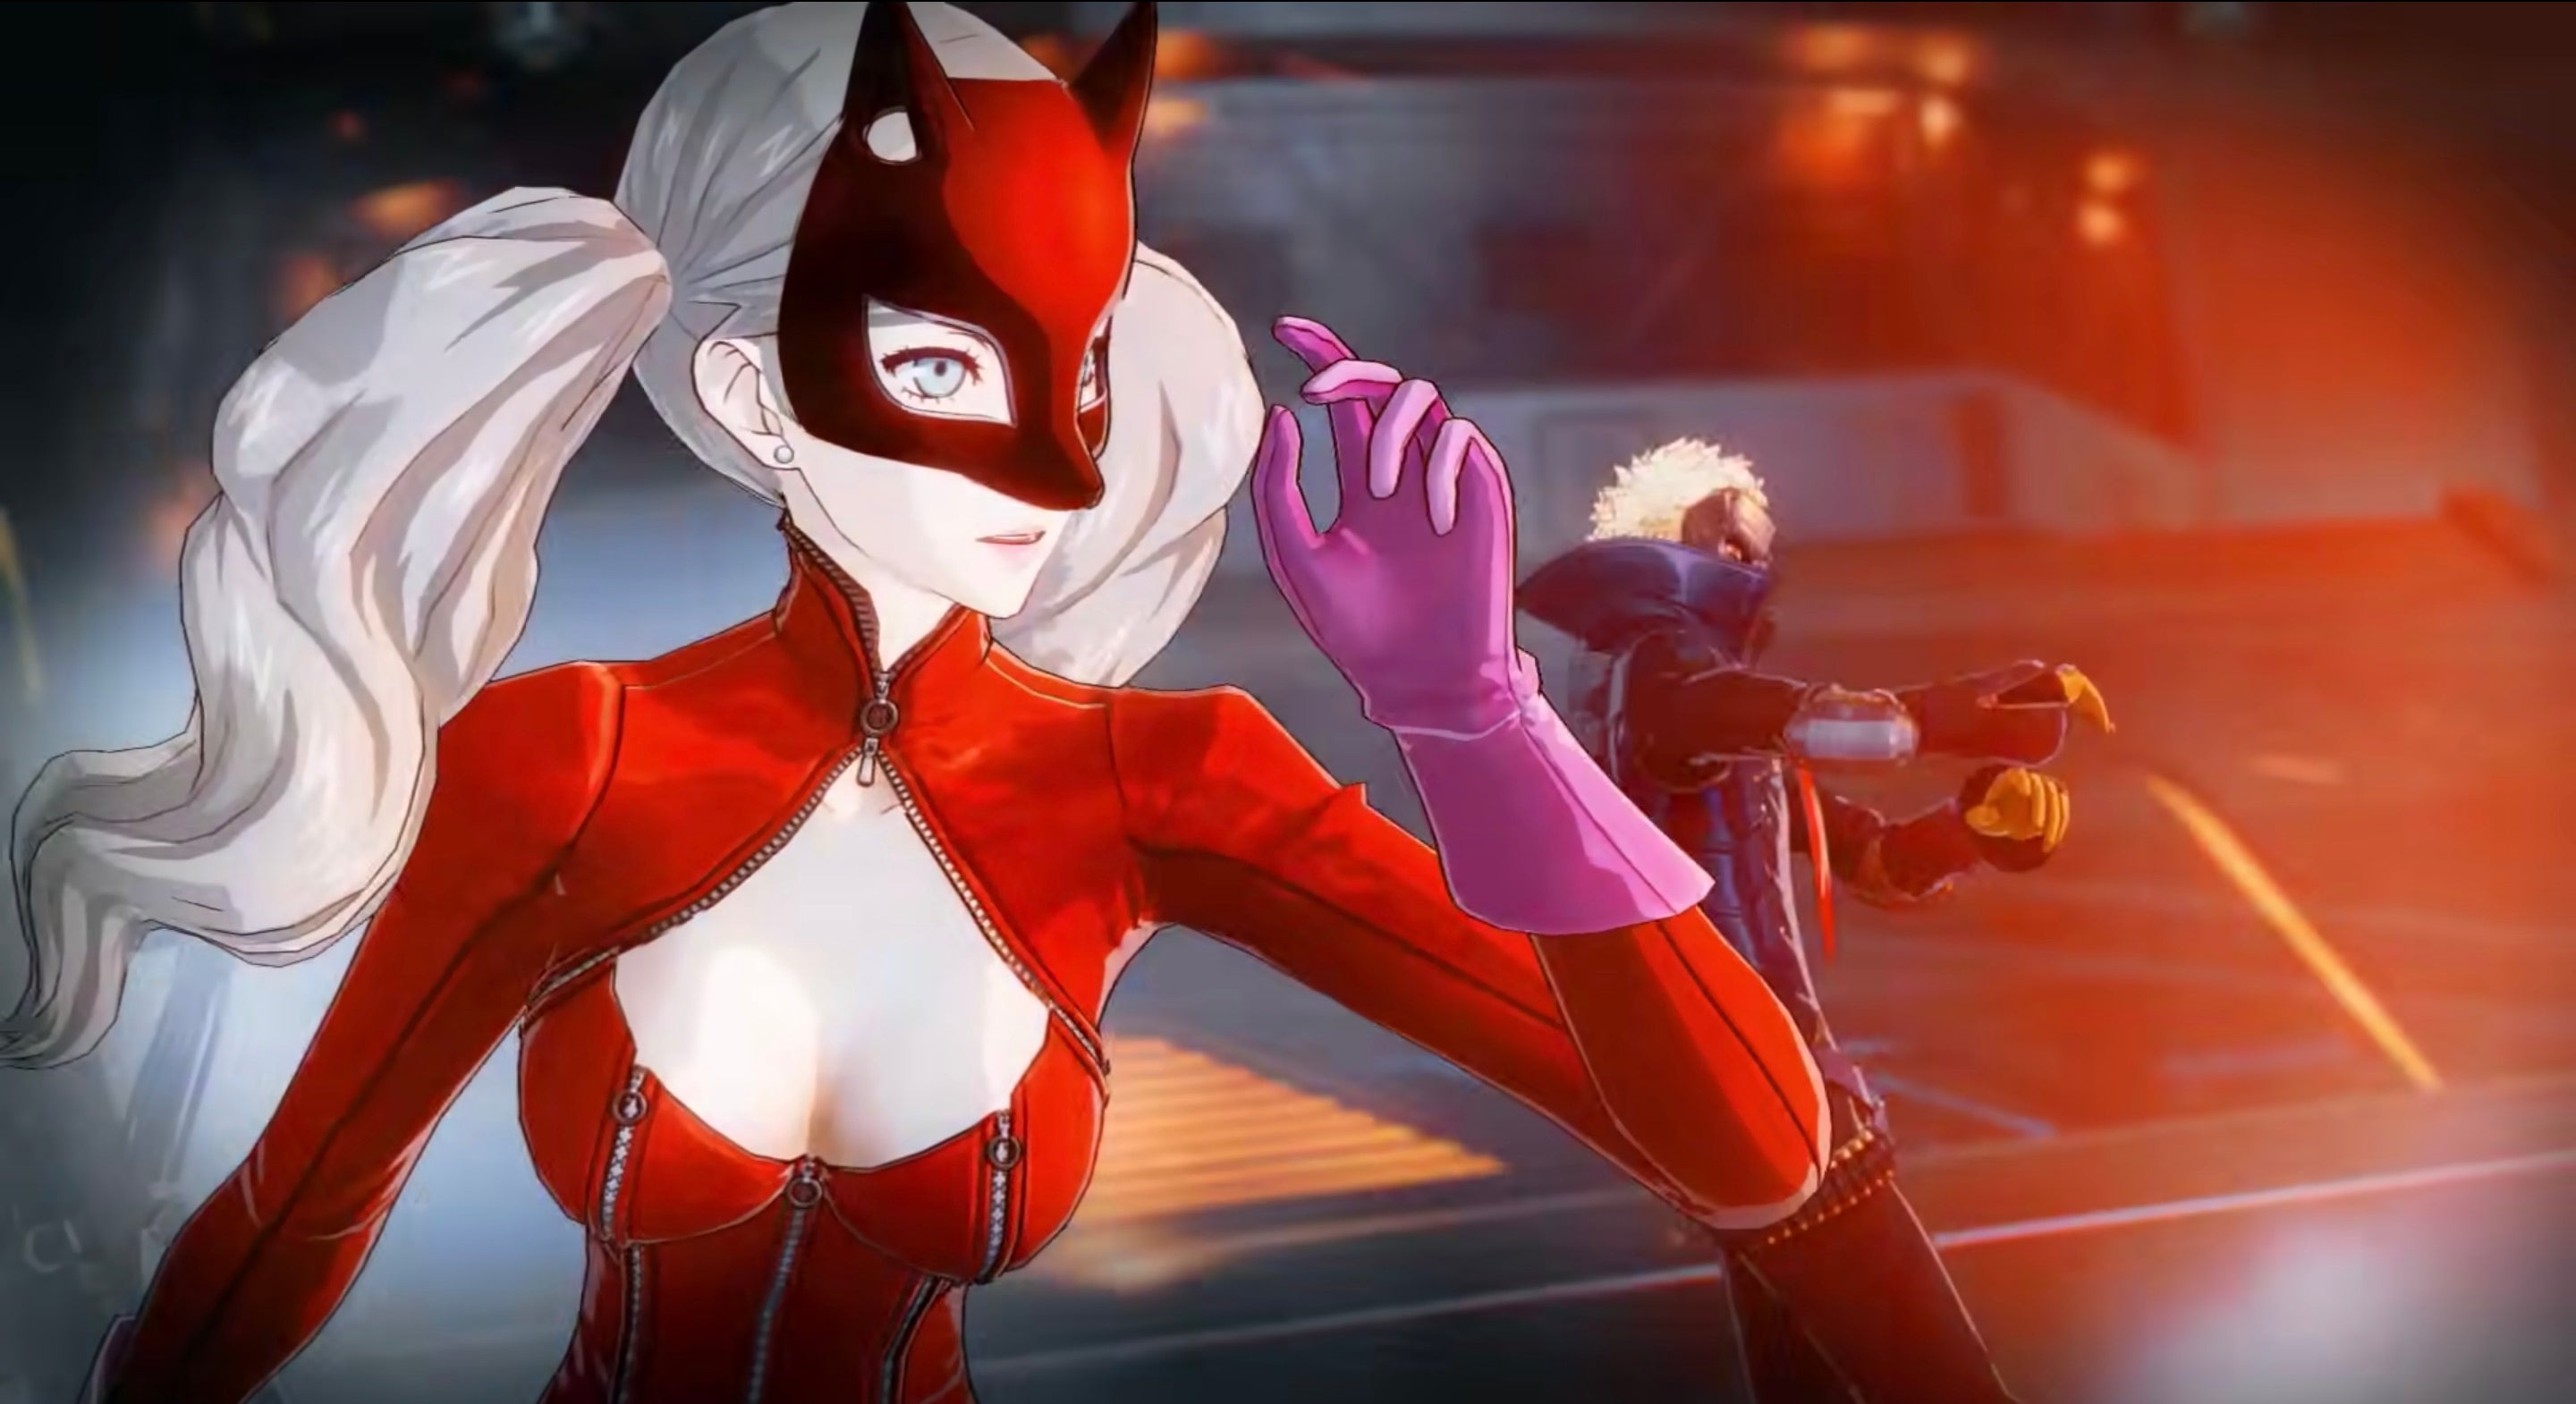 Ann stares down an enemy in Persona 5 Strikers